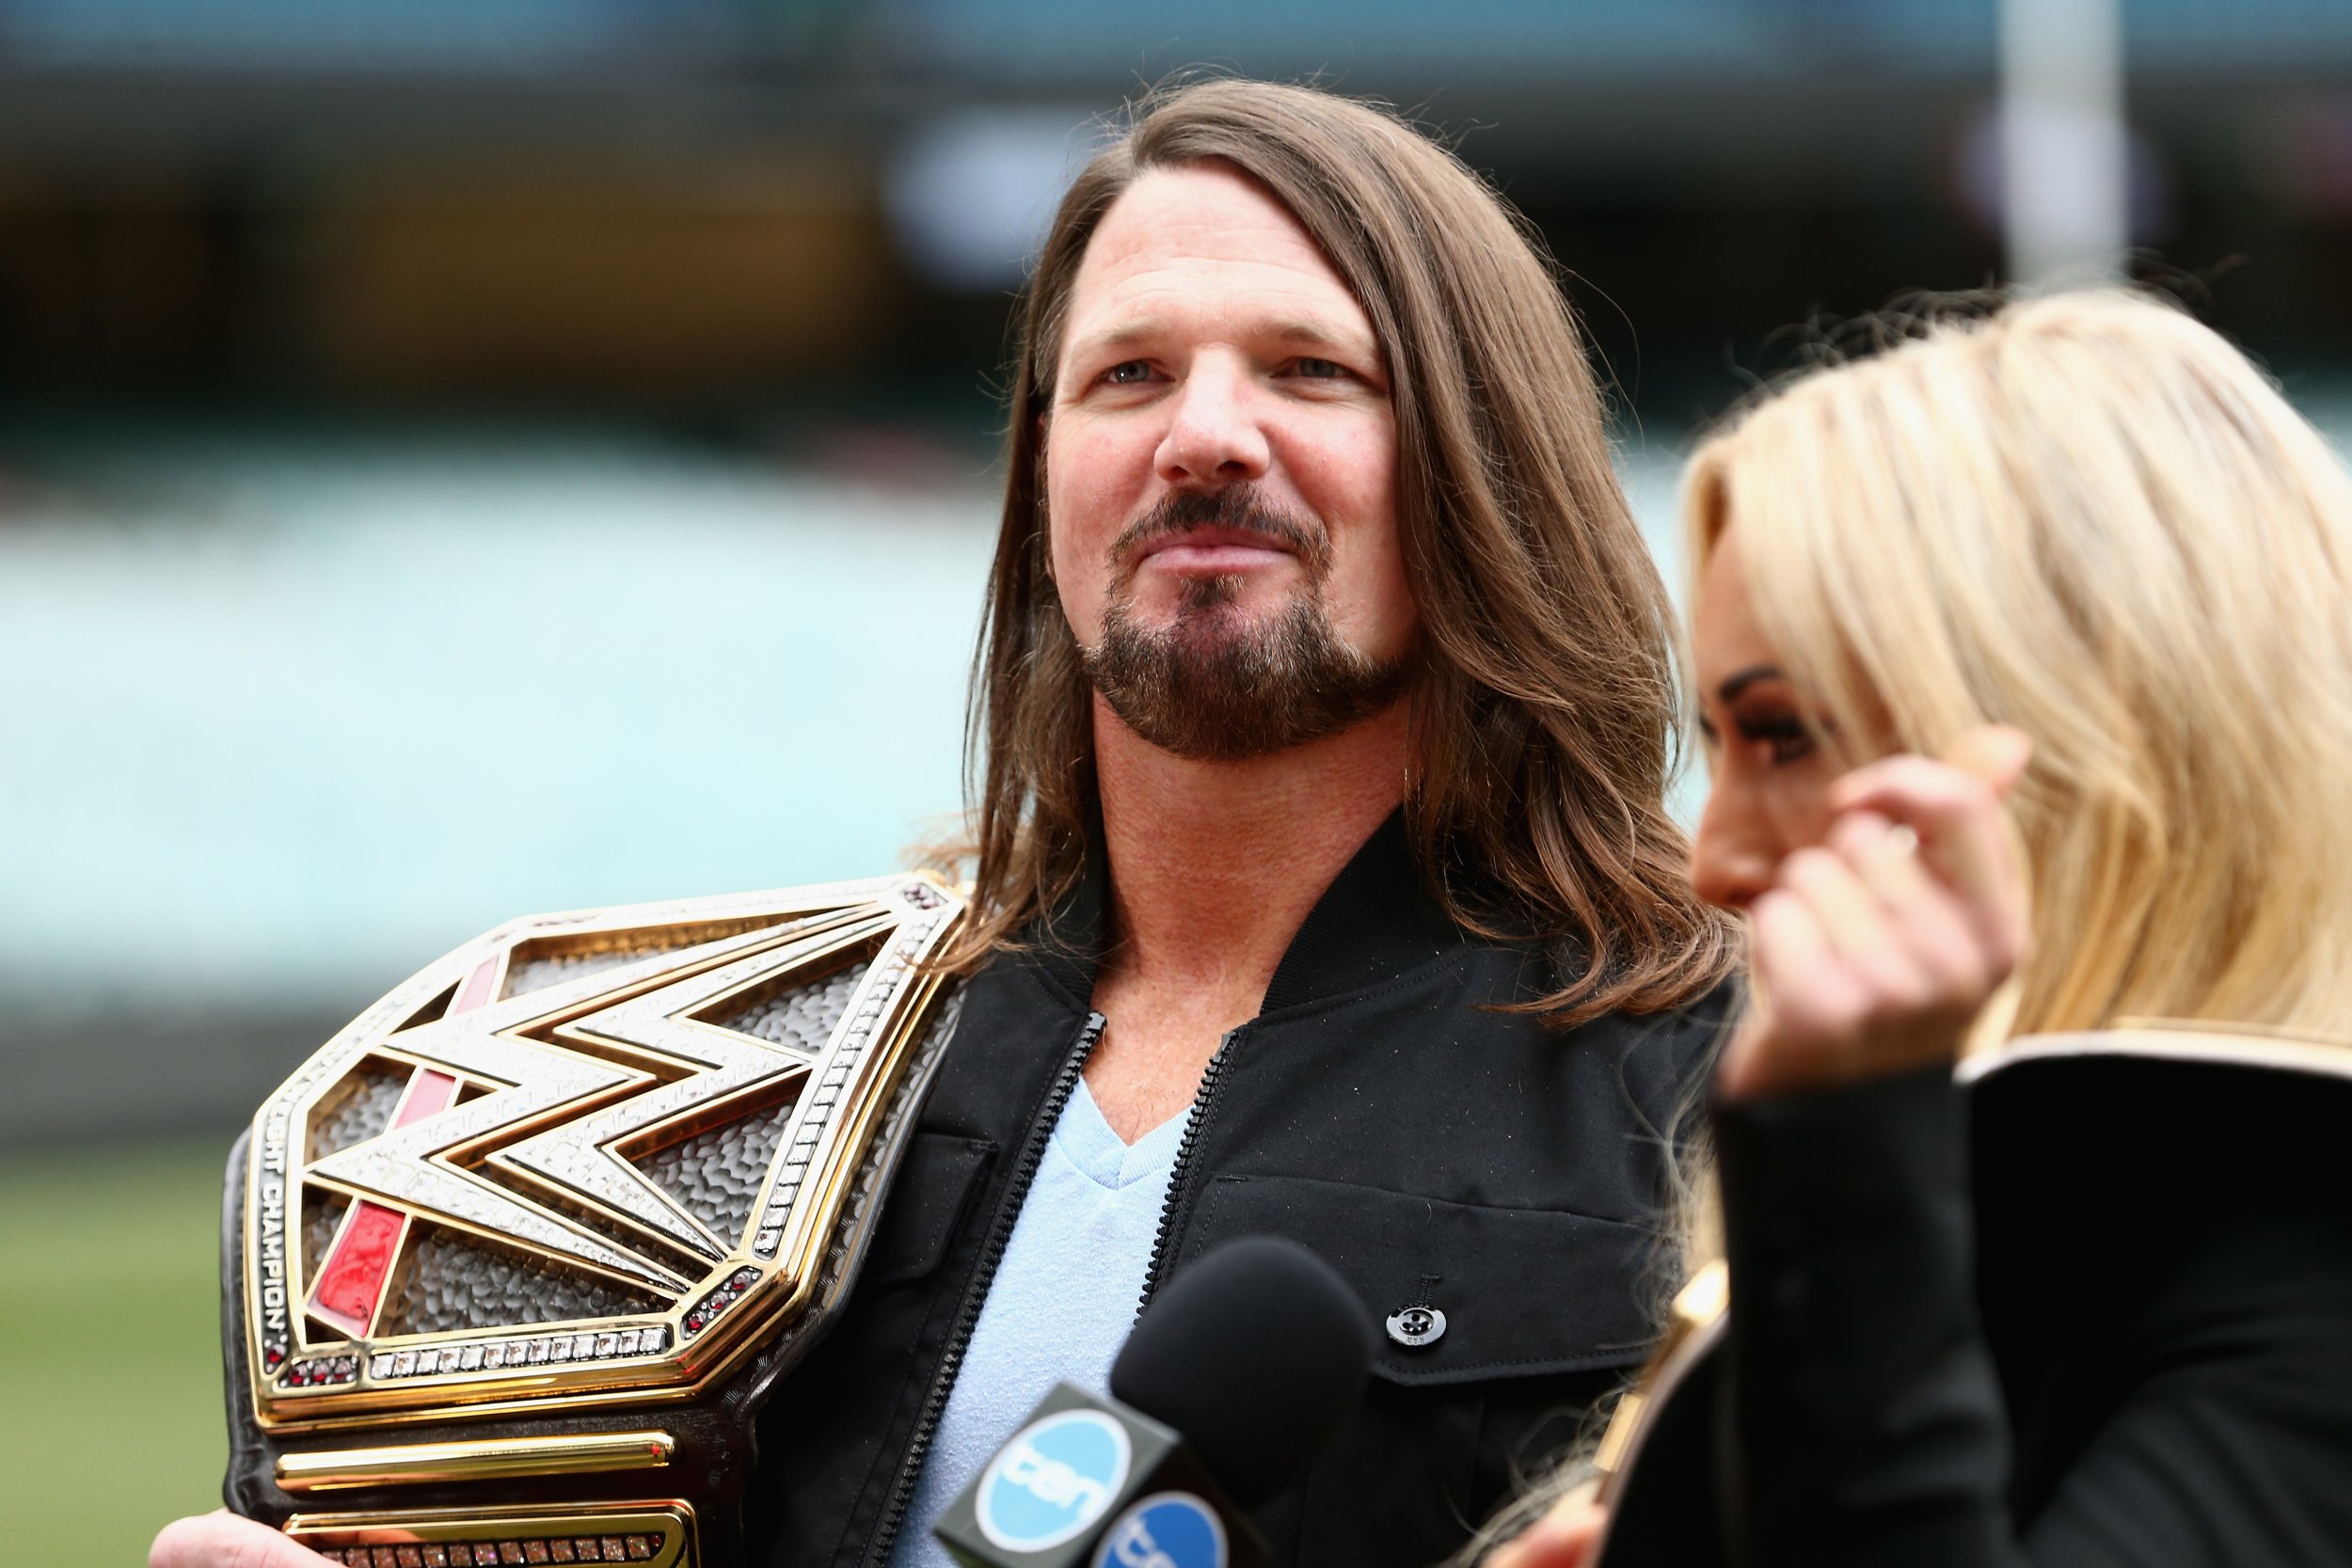 AJ Styles Confirms WWE Departure, Will Not Sign Another Contract